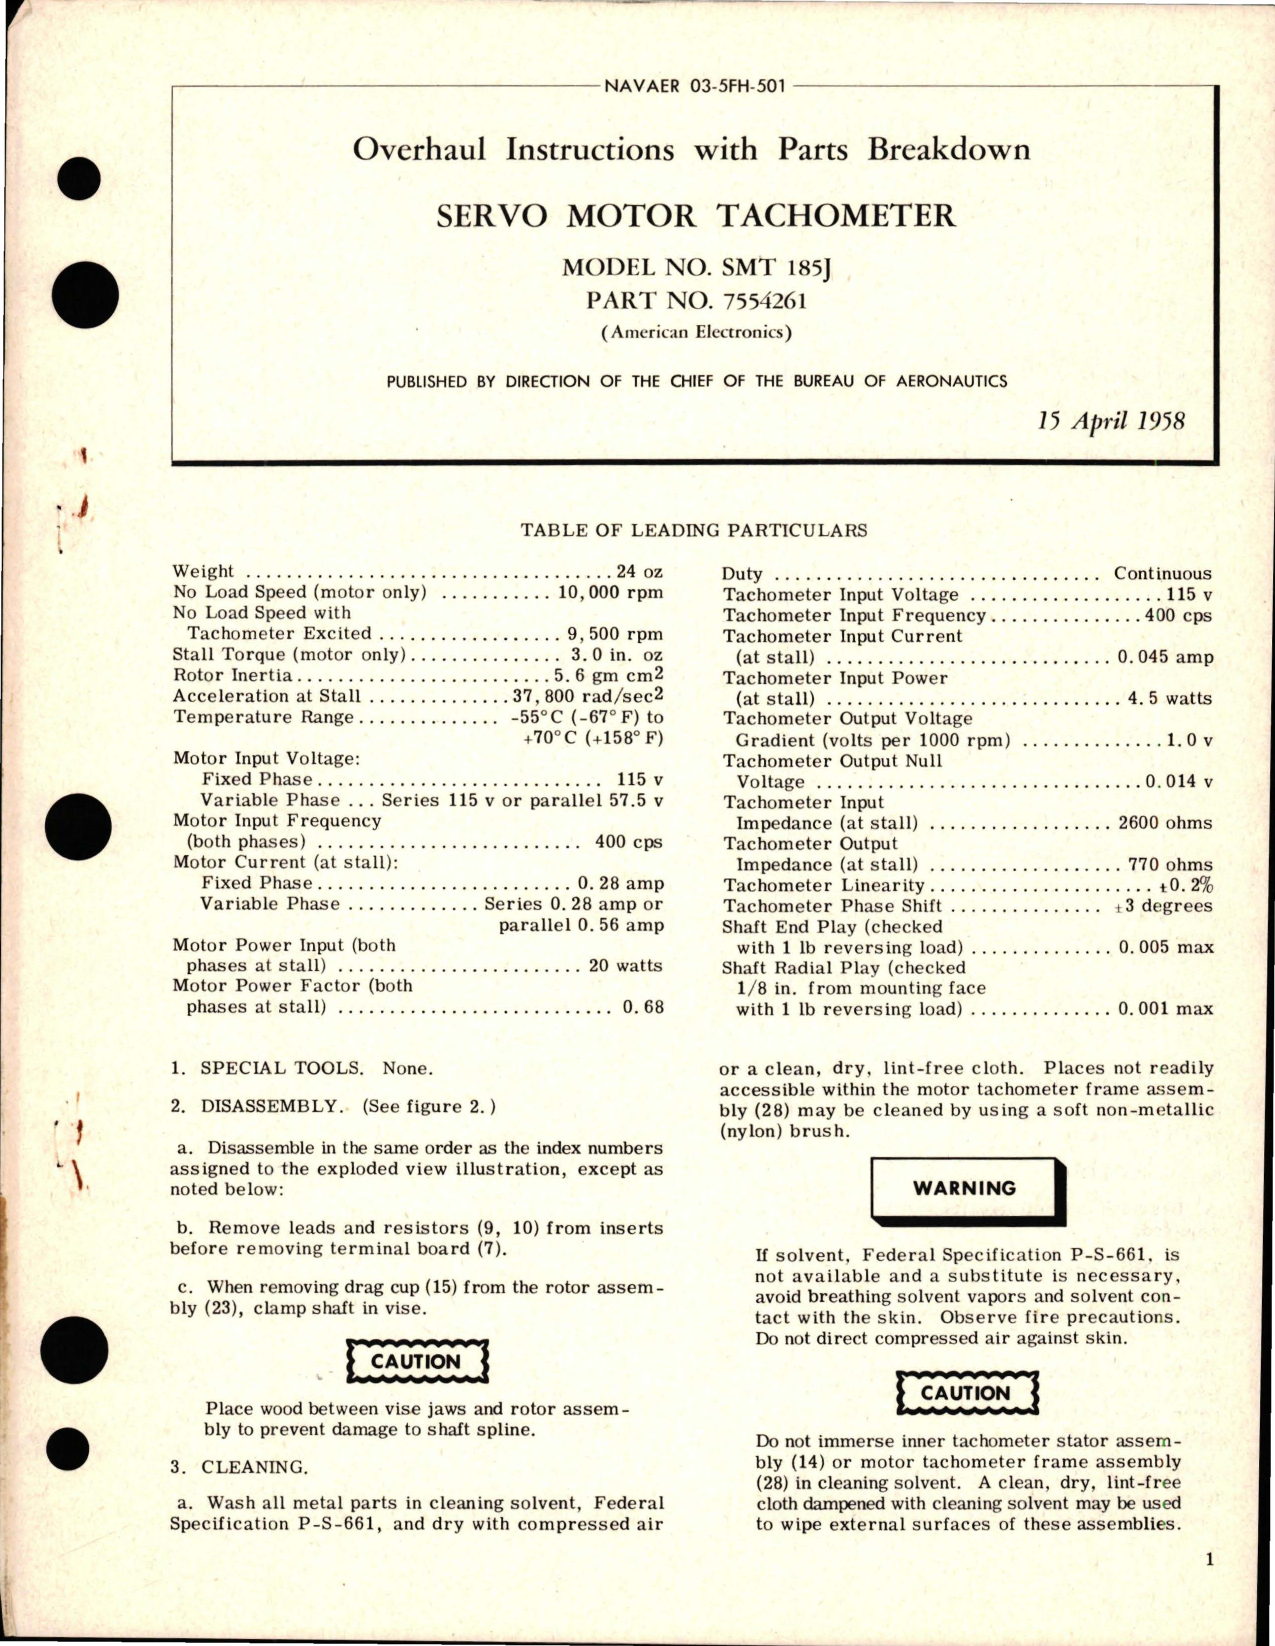 Sample page 1 from AirCorps Library document: Overhaul Instructions with Parts Breakdown for Servo Motor Tachometer - Model SMT 185J - Part 7554261 